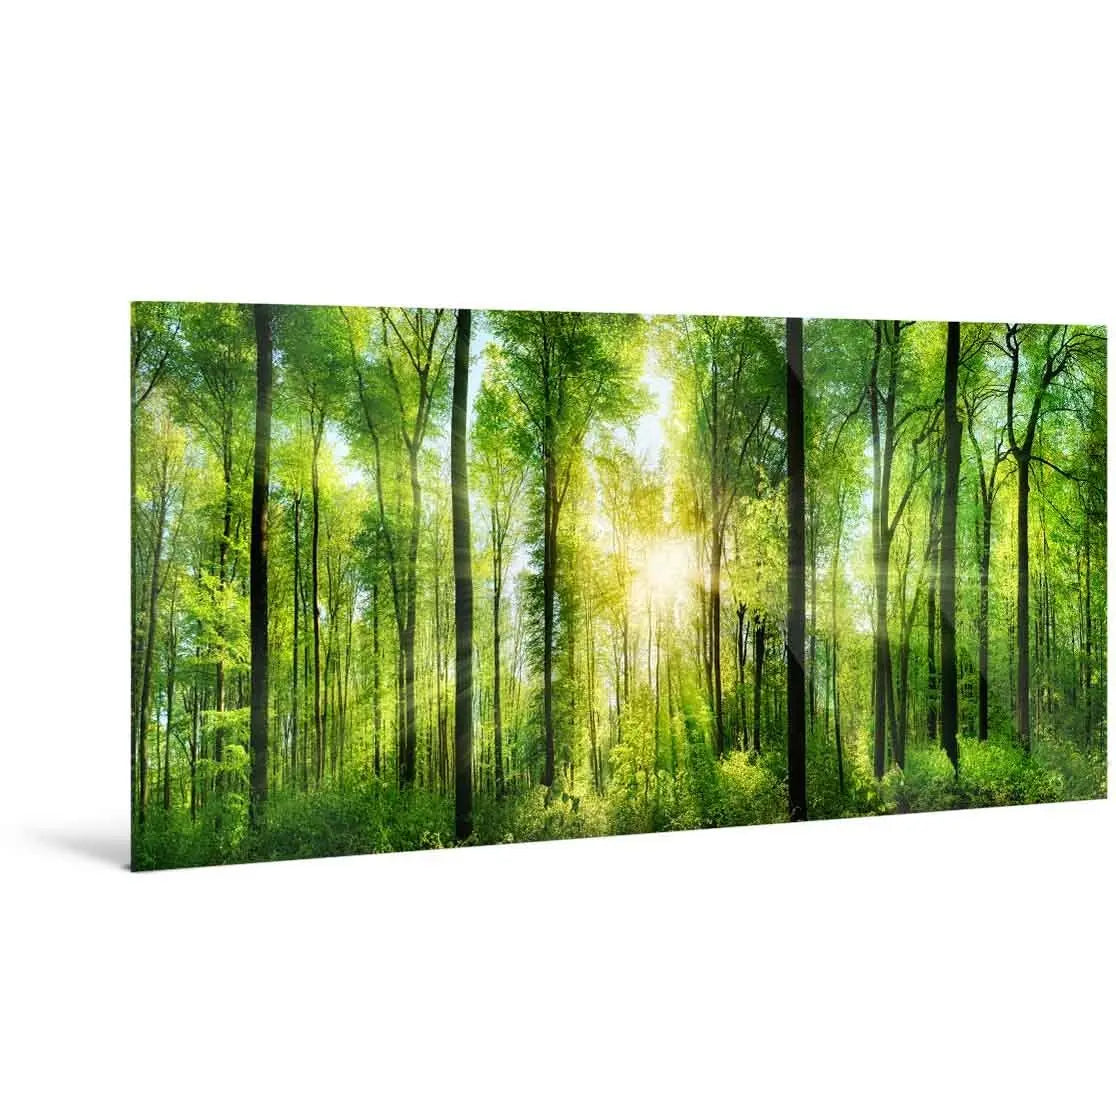 "FOREST SUNRISE" - Art For Everyone